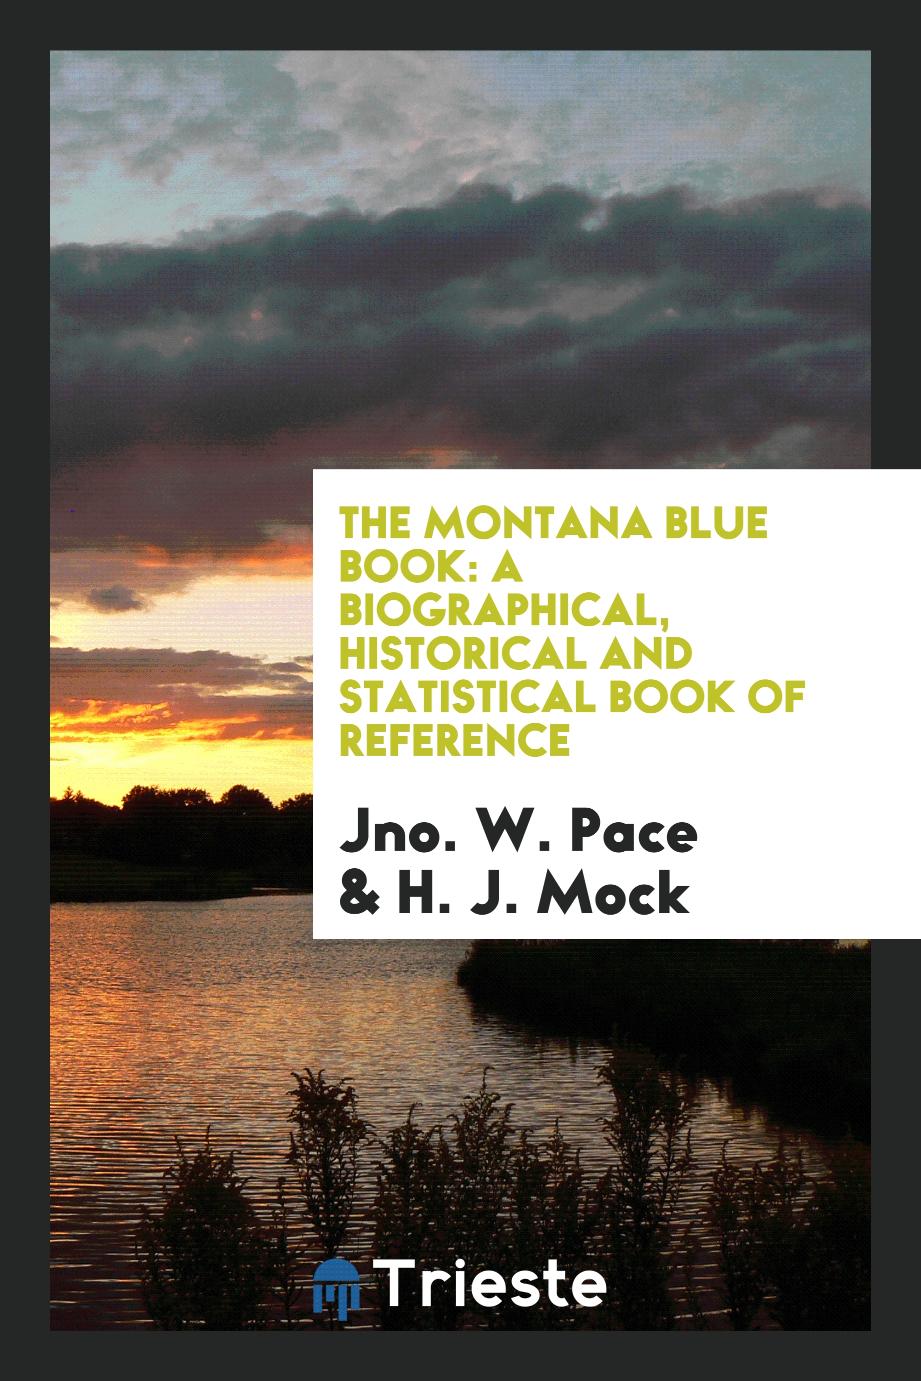 The Montana Blue Book: a Biographical, Historical and Statistical Book of Reference